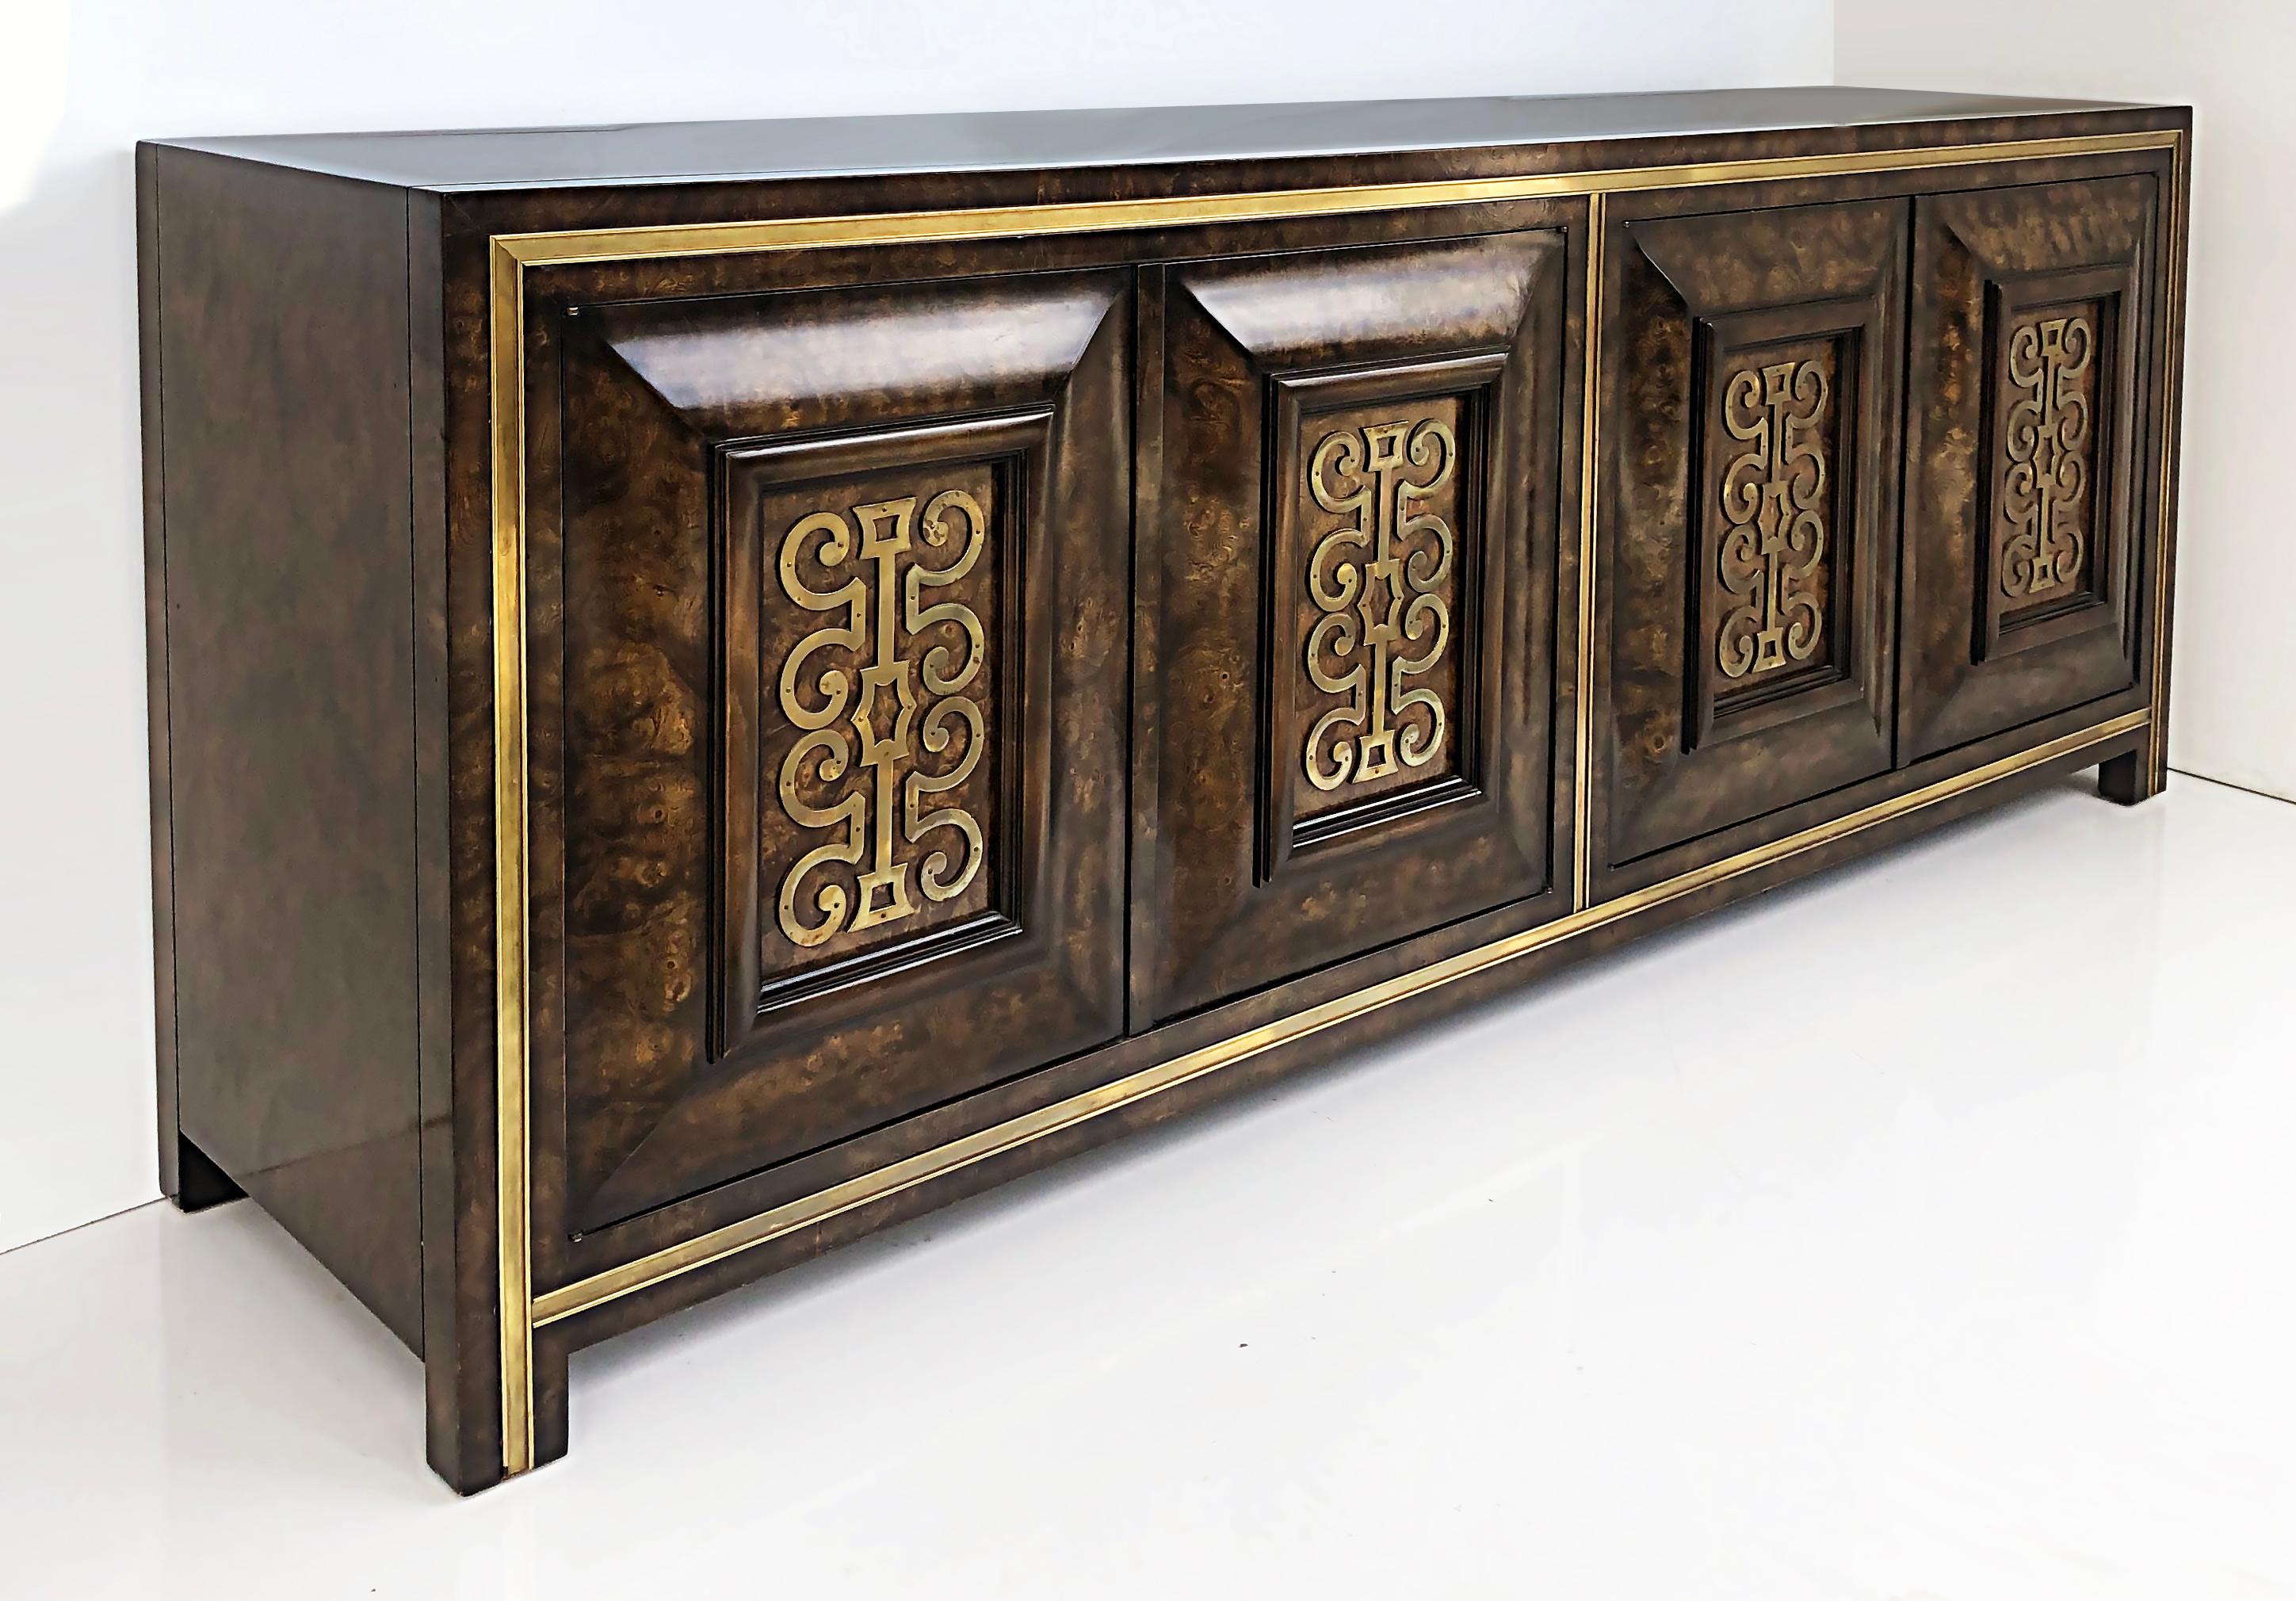 Mastercraft elm and brass credenza by William Doezema, 1970s

Offered for sale is a 1970s Mastercraft Furniture Co. Carpathian Elm and brass mounted credenza designed by William Doezema. The cabinet has four doors with touch release latches that